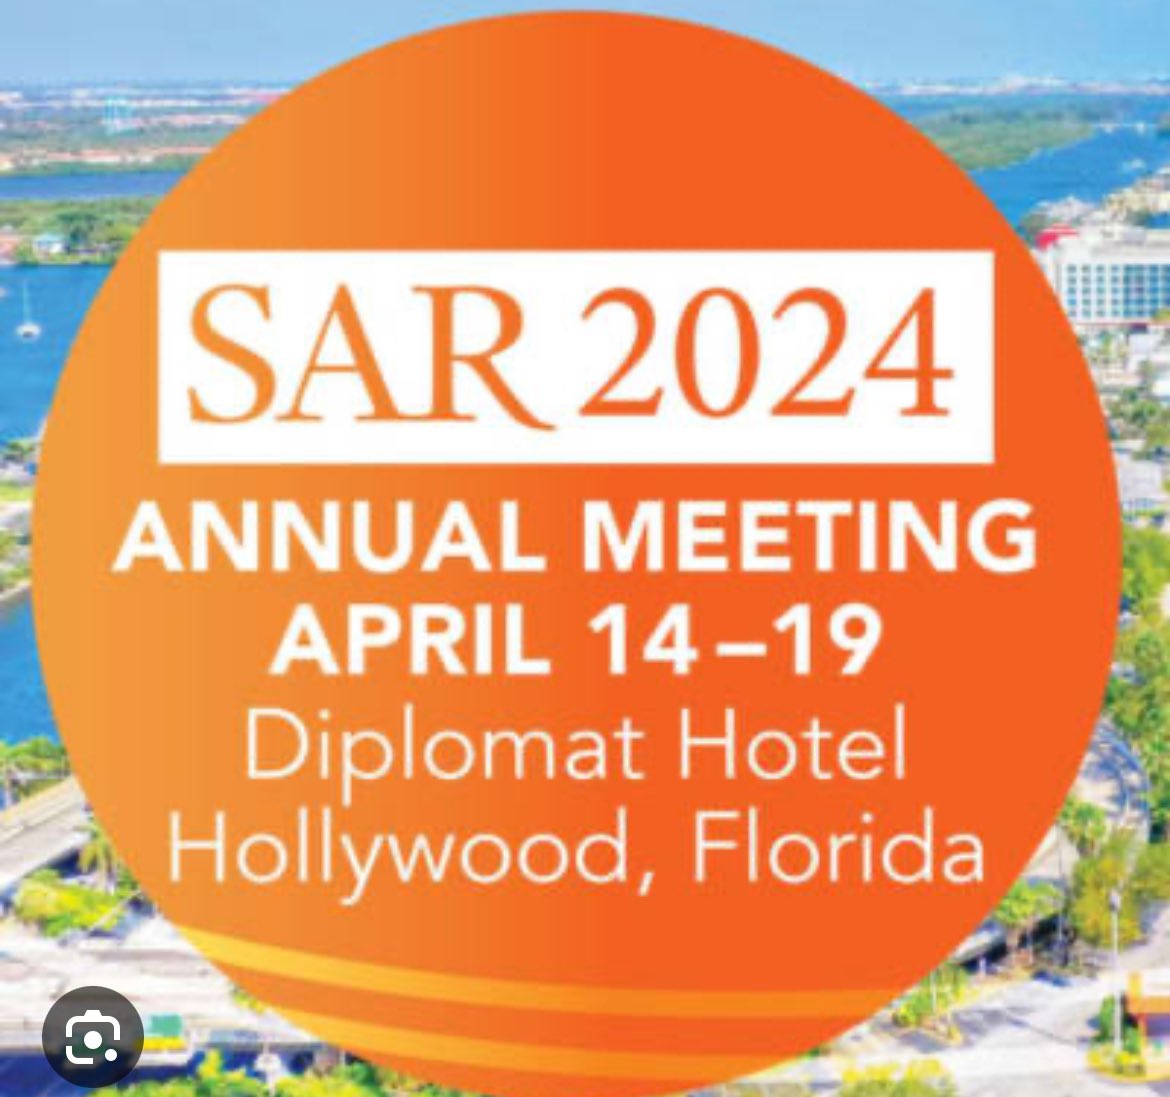 Thrilled to be joining the #SAR24 chronic liver disease imaging hands on workshop faculty team this year. Thanks to the strong attendee interest, this year we are repeating it with new cases and US and MRI innovations. Join us!!@SocietyAbdRad 
Our ⭐️faculty team includes 👇(1)